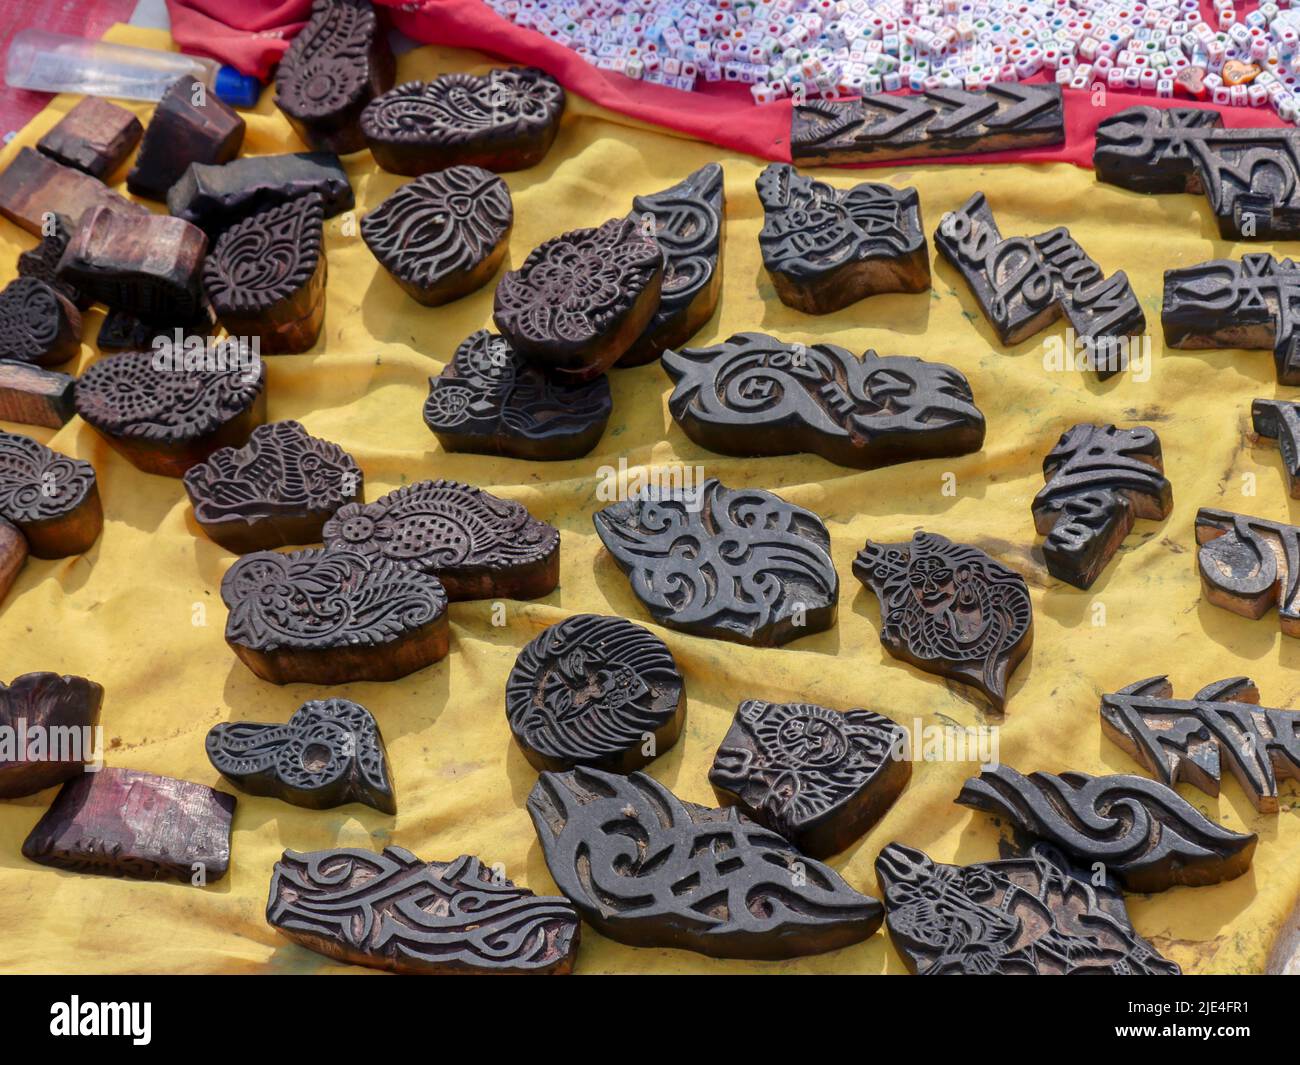 Wooden motifs blocks. Hand Carved Wooden Baren/Motif Printing Block for Artistic use for various works for painting, designing in rural villages Stock Photo